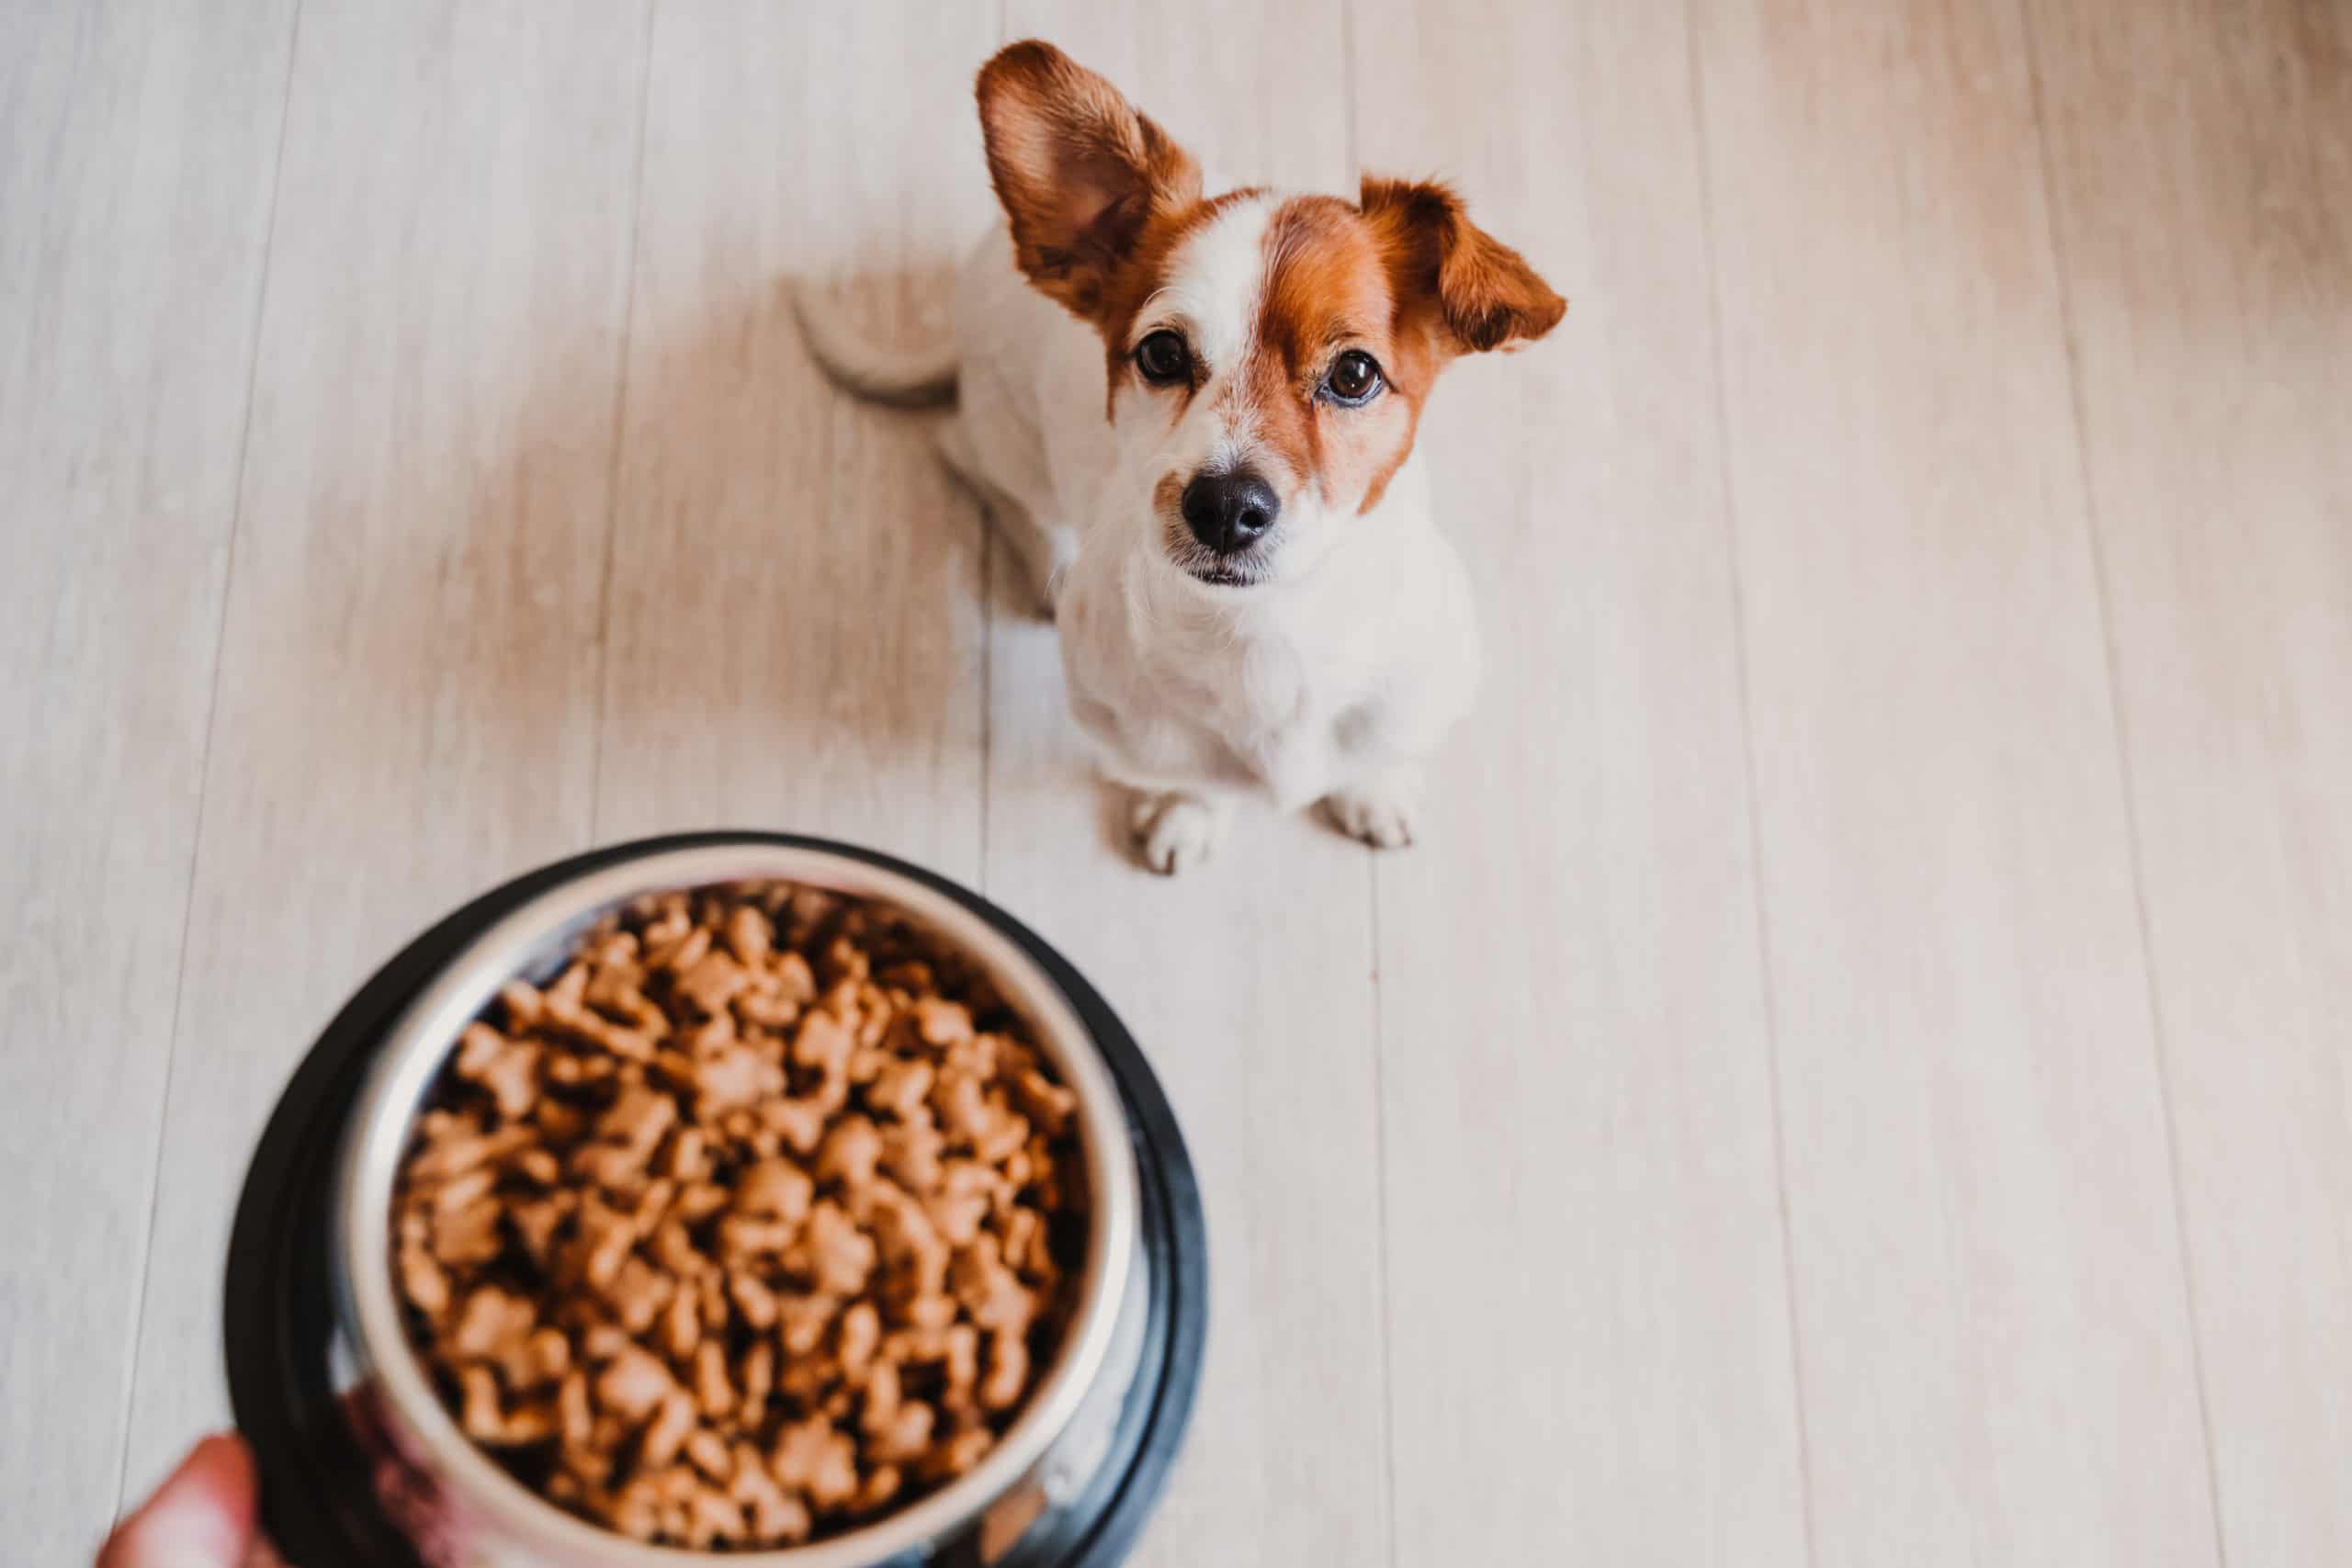 How long should you leave dog food out?